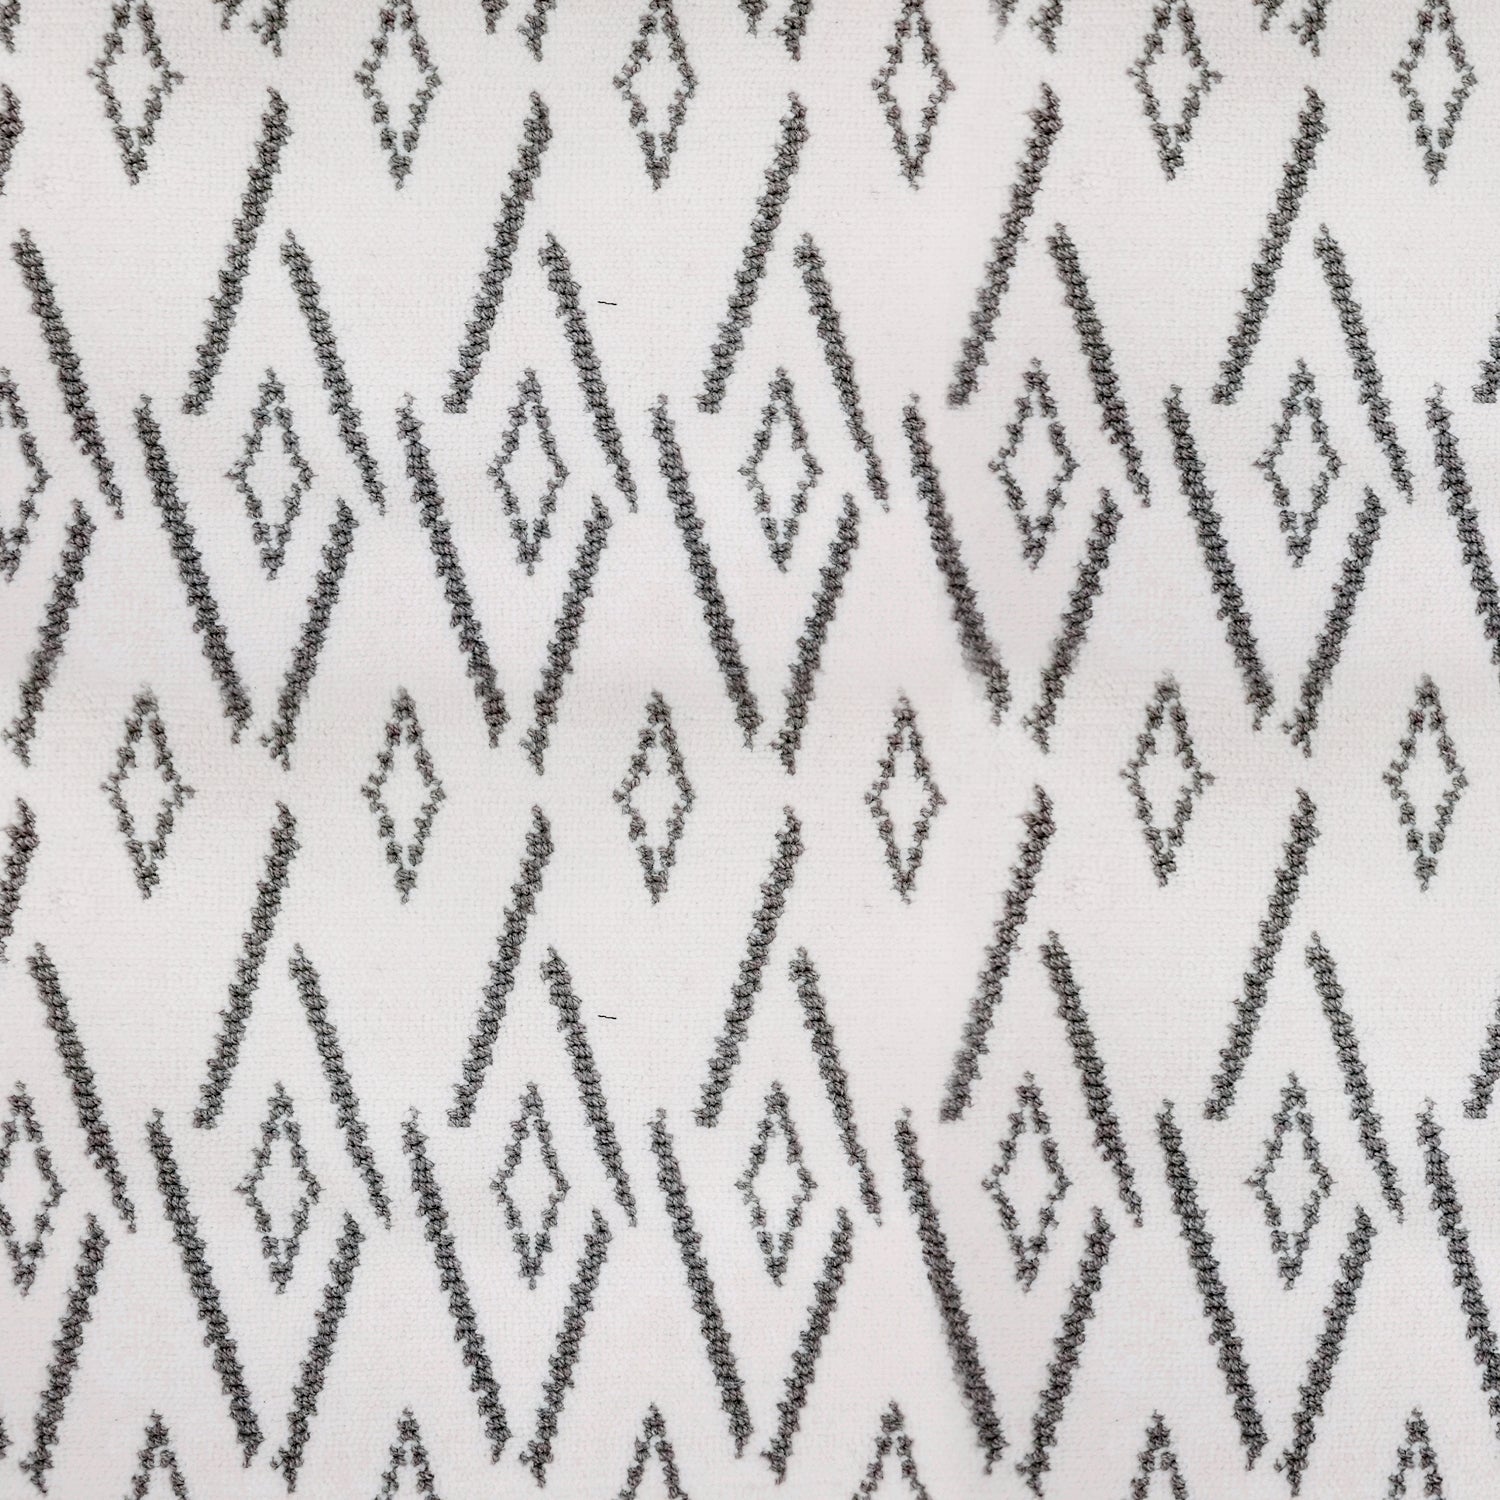 Woven broadloom carpet swatch in a repeating irregular diamond pattern in charcoal on a cream field.